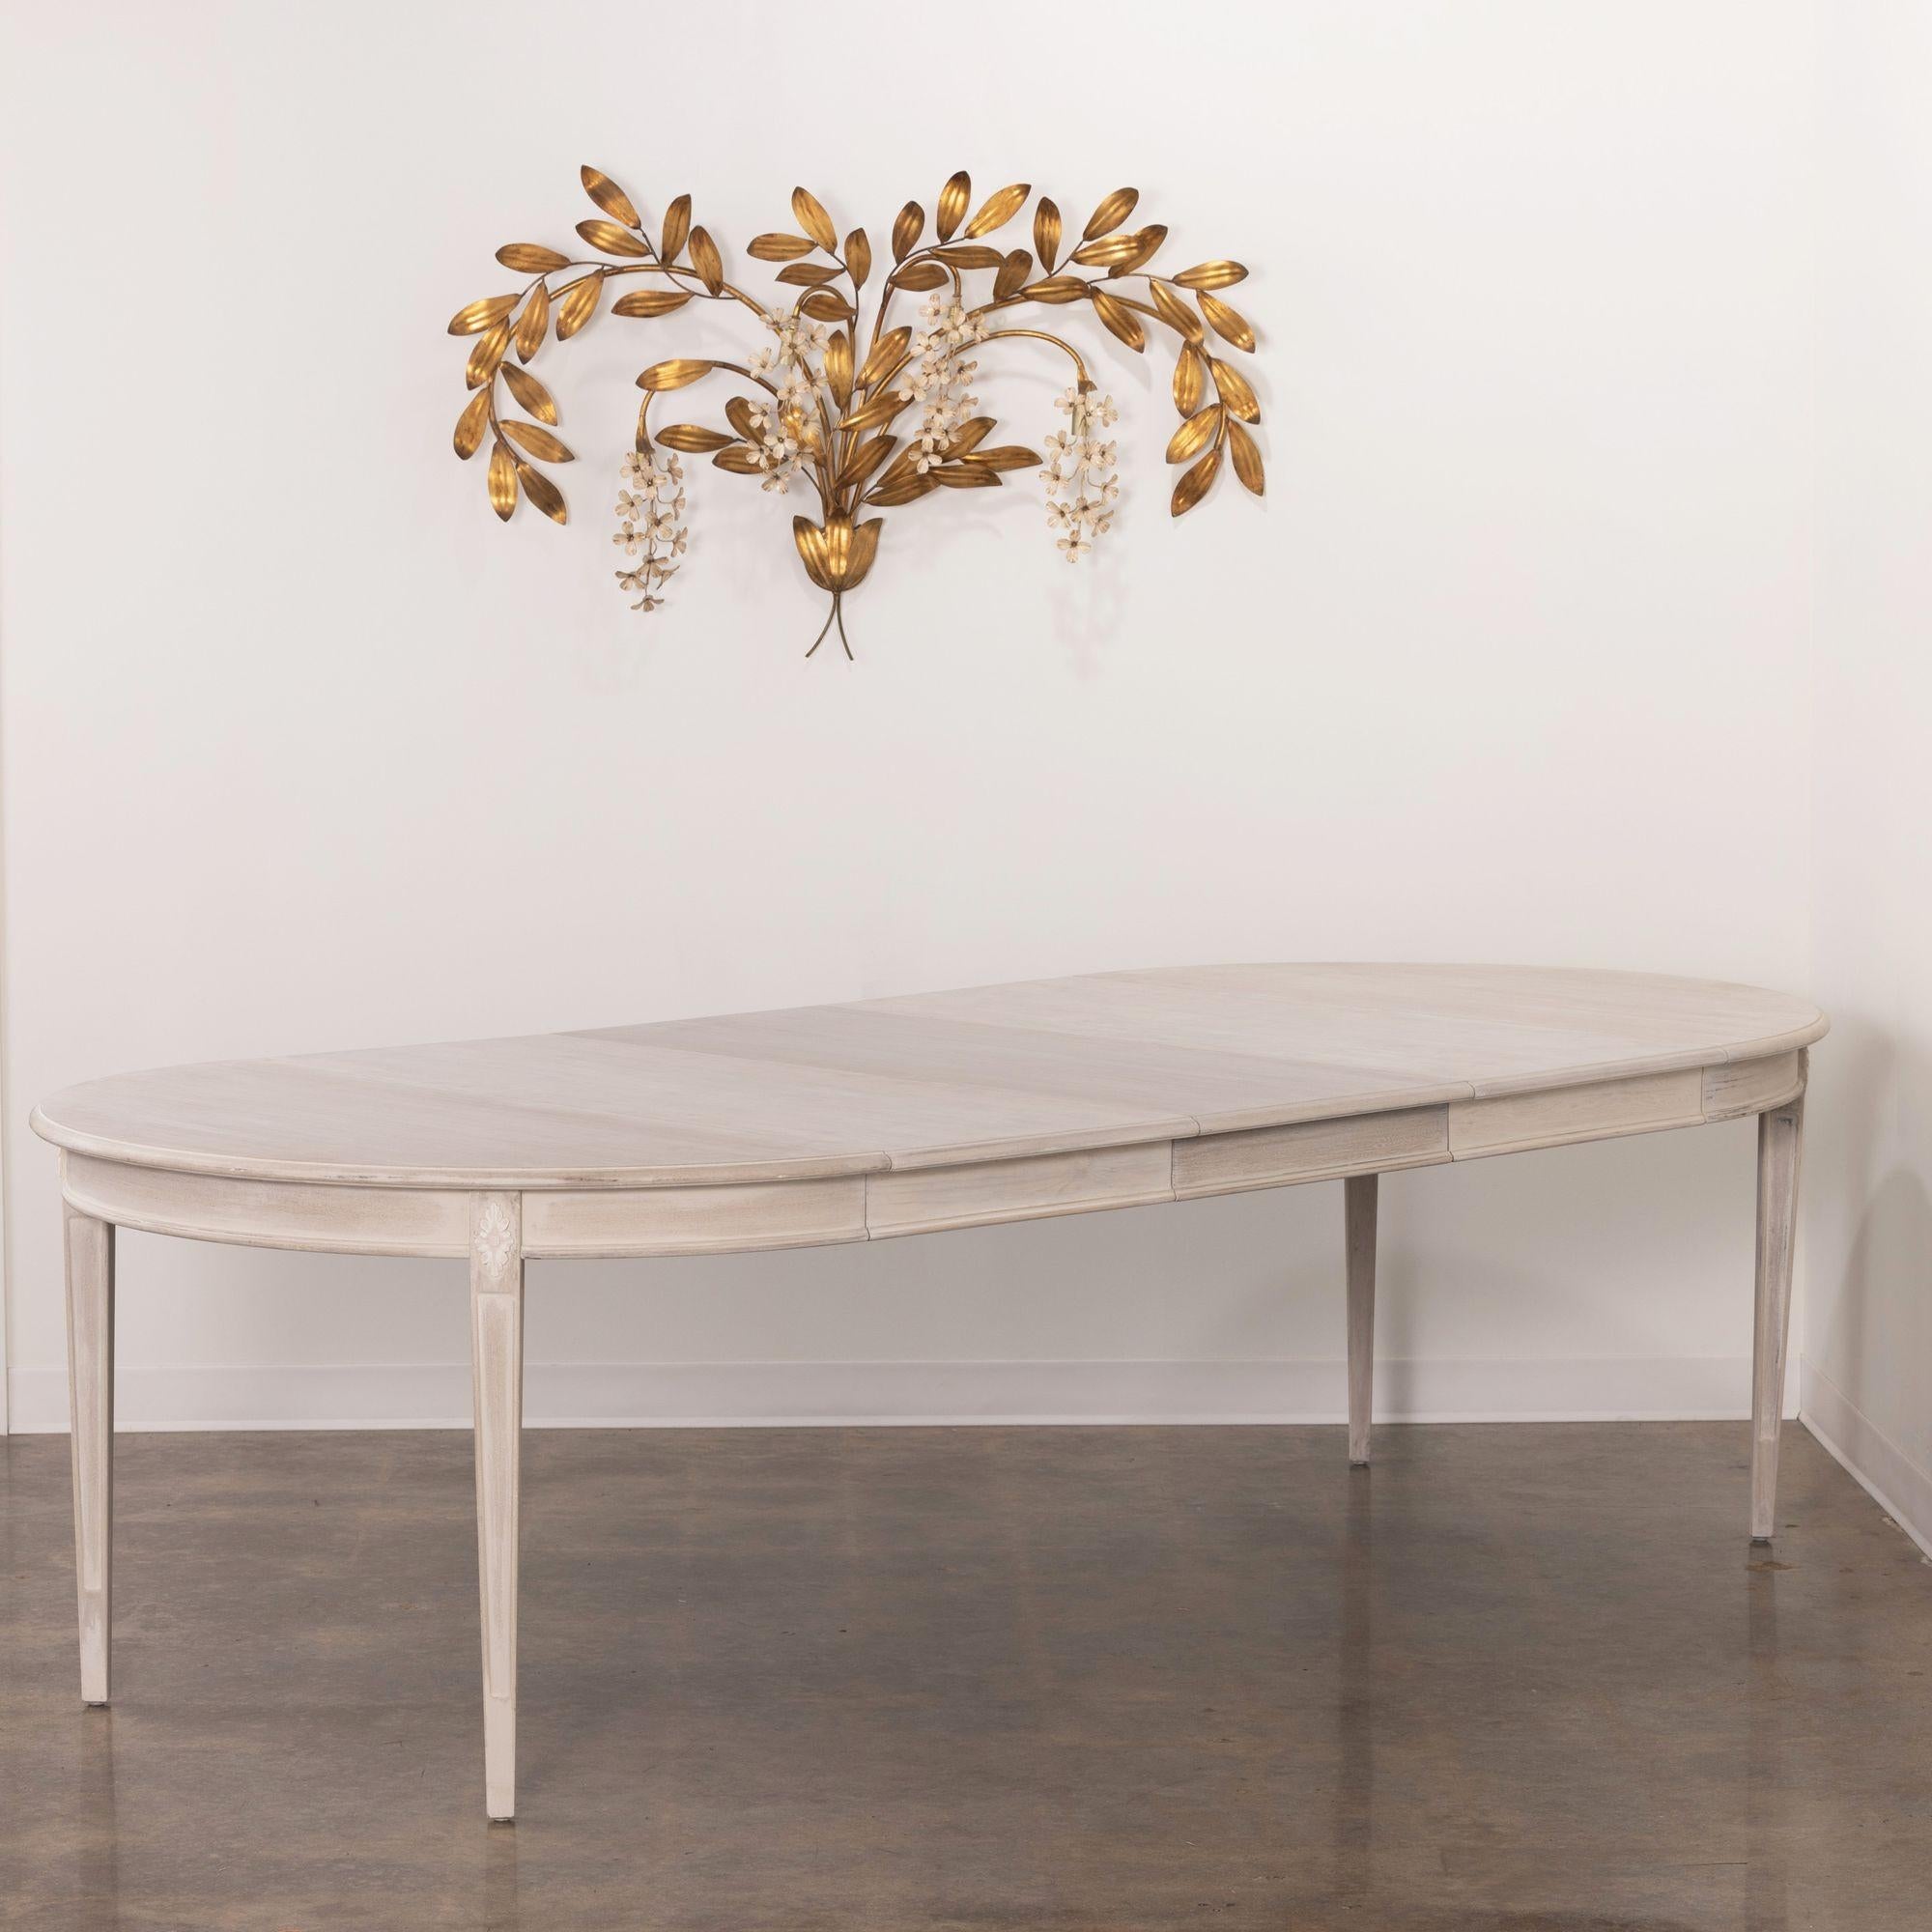 19th c. Swedish Gustavian Bleached and Glazed Extension Table with Three Leaves For Sale 6